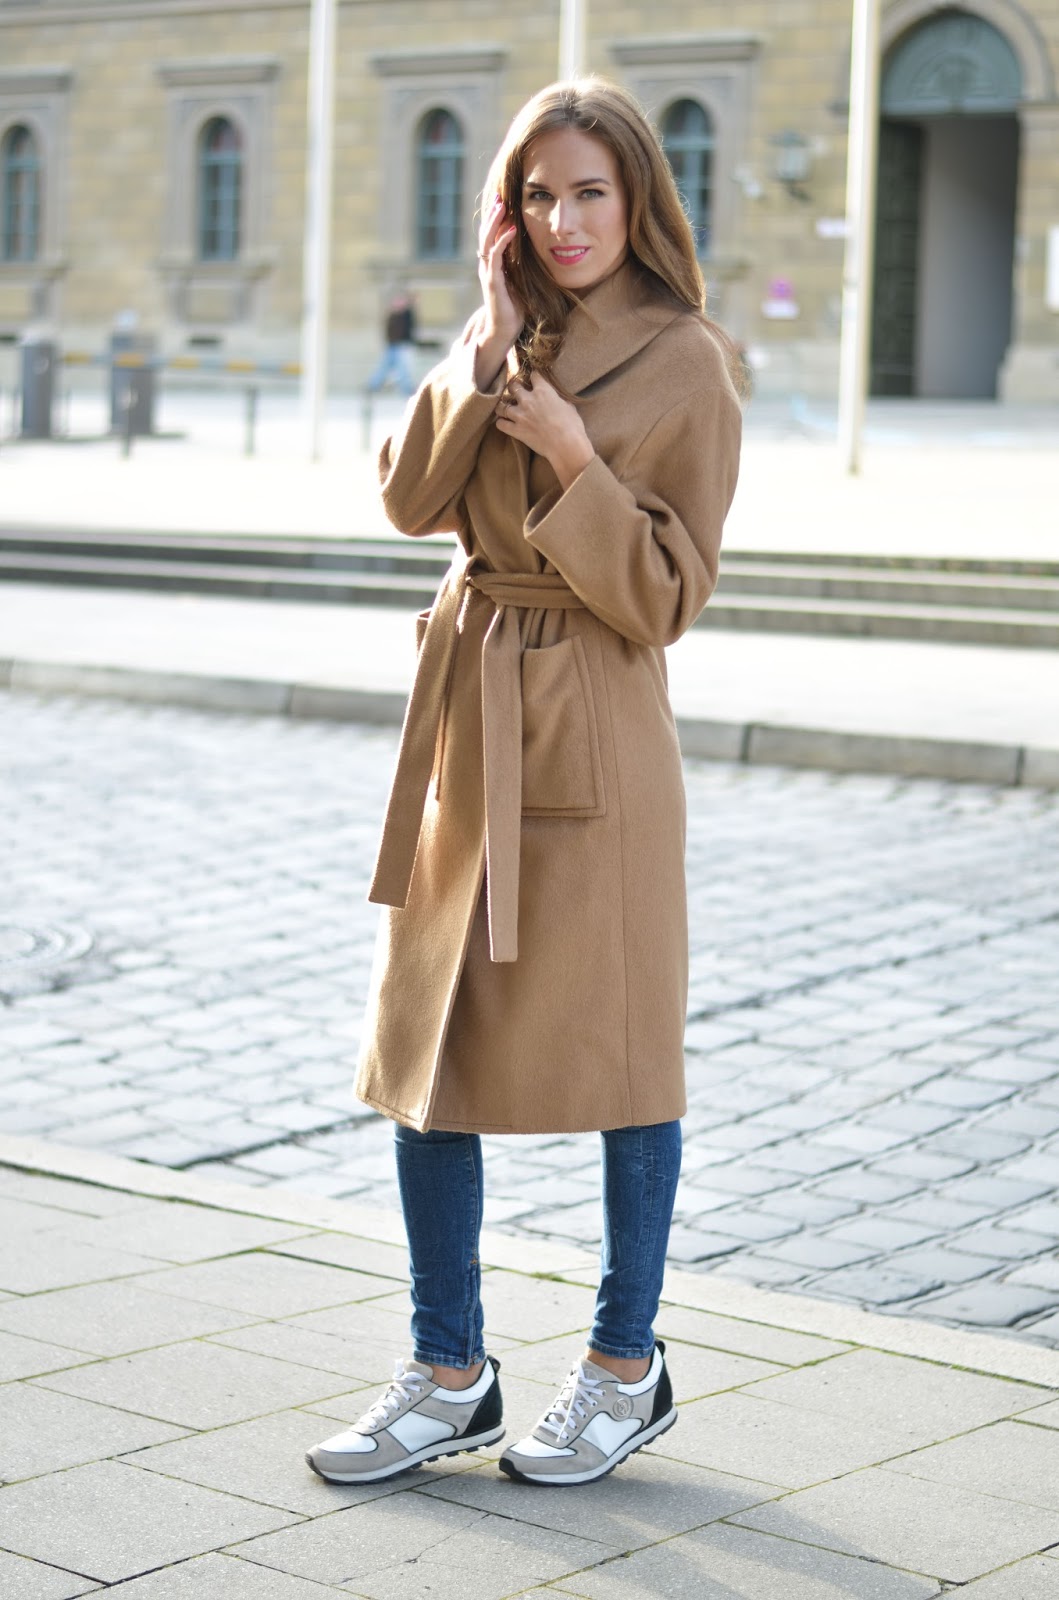 kristjaana mere camel coat fall outfit with skinny jeans white sneakers